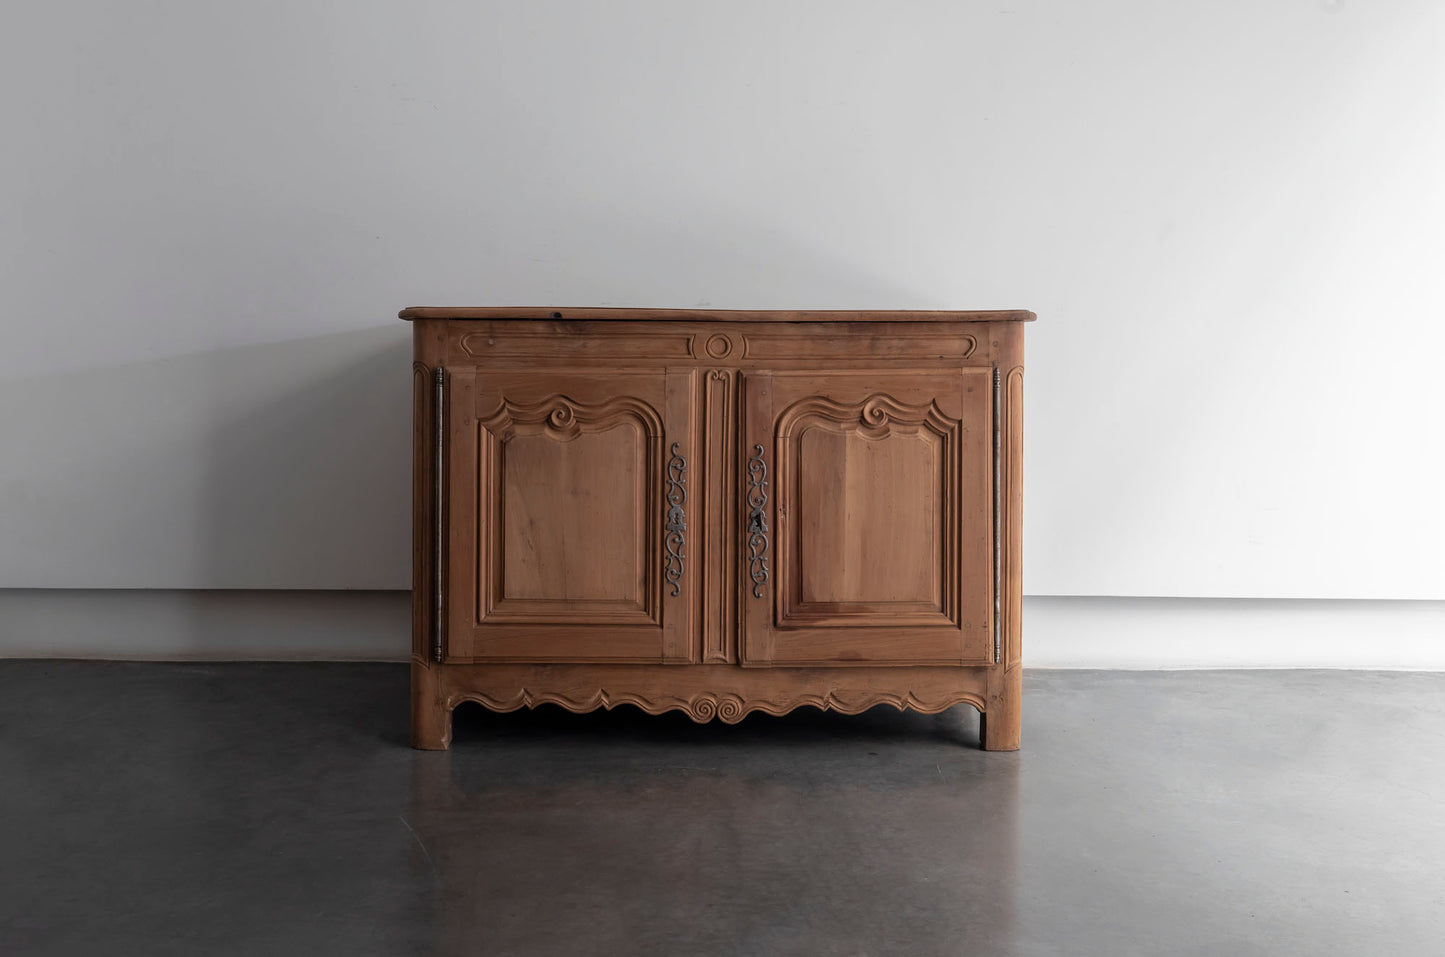 FRENCH SIDEBOARD